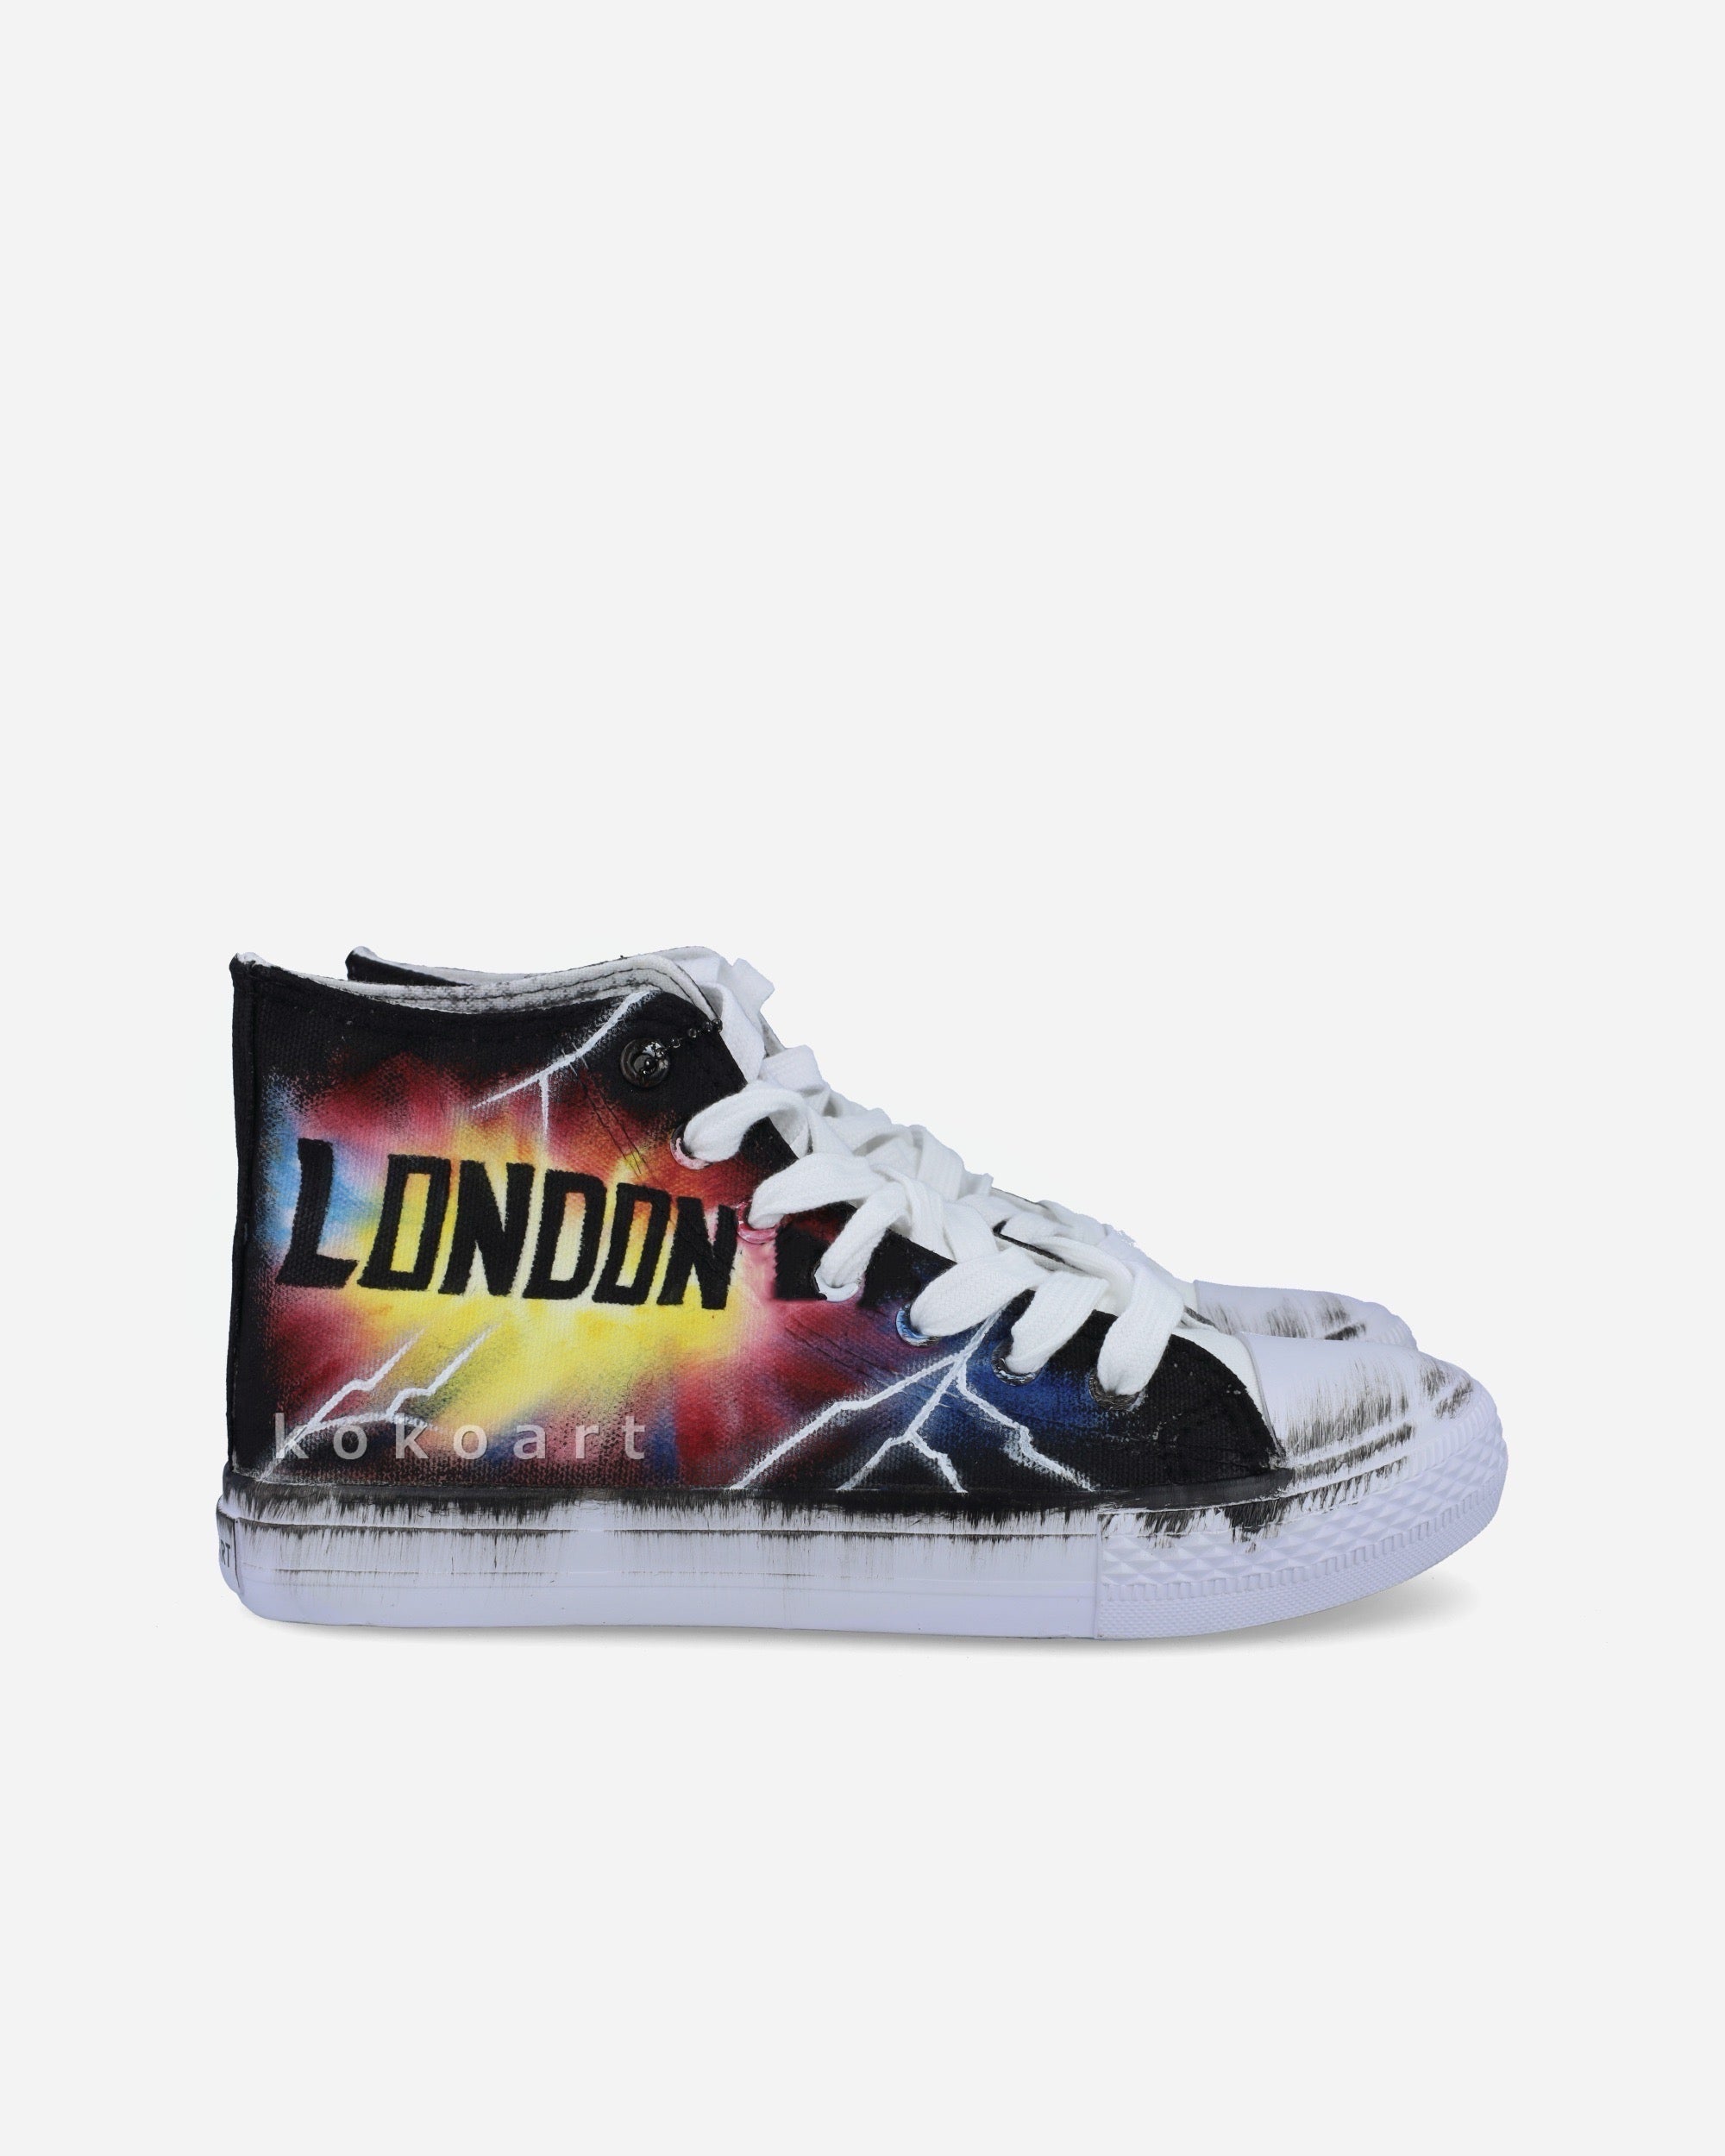 London Hand Painted Shoes